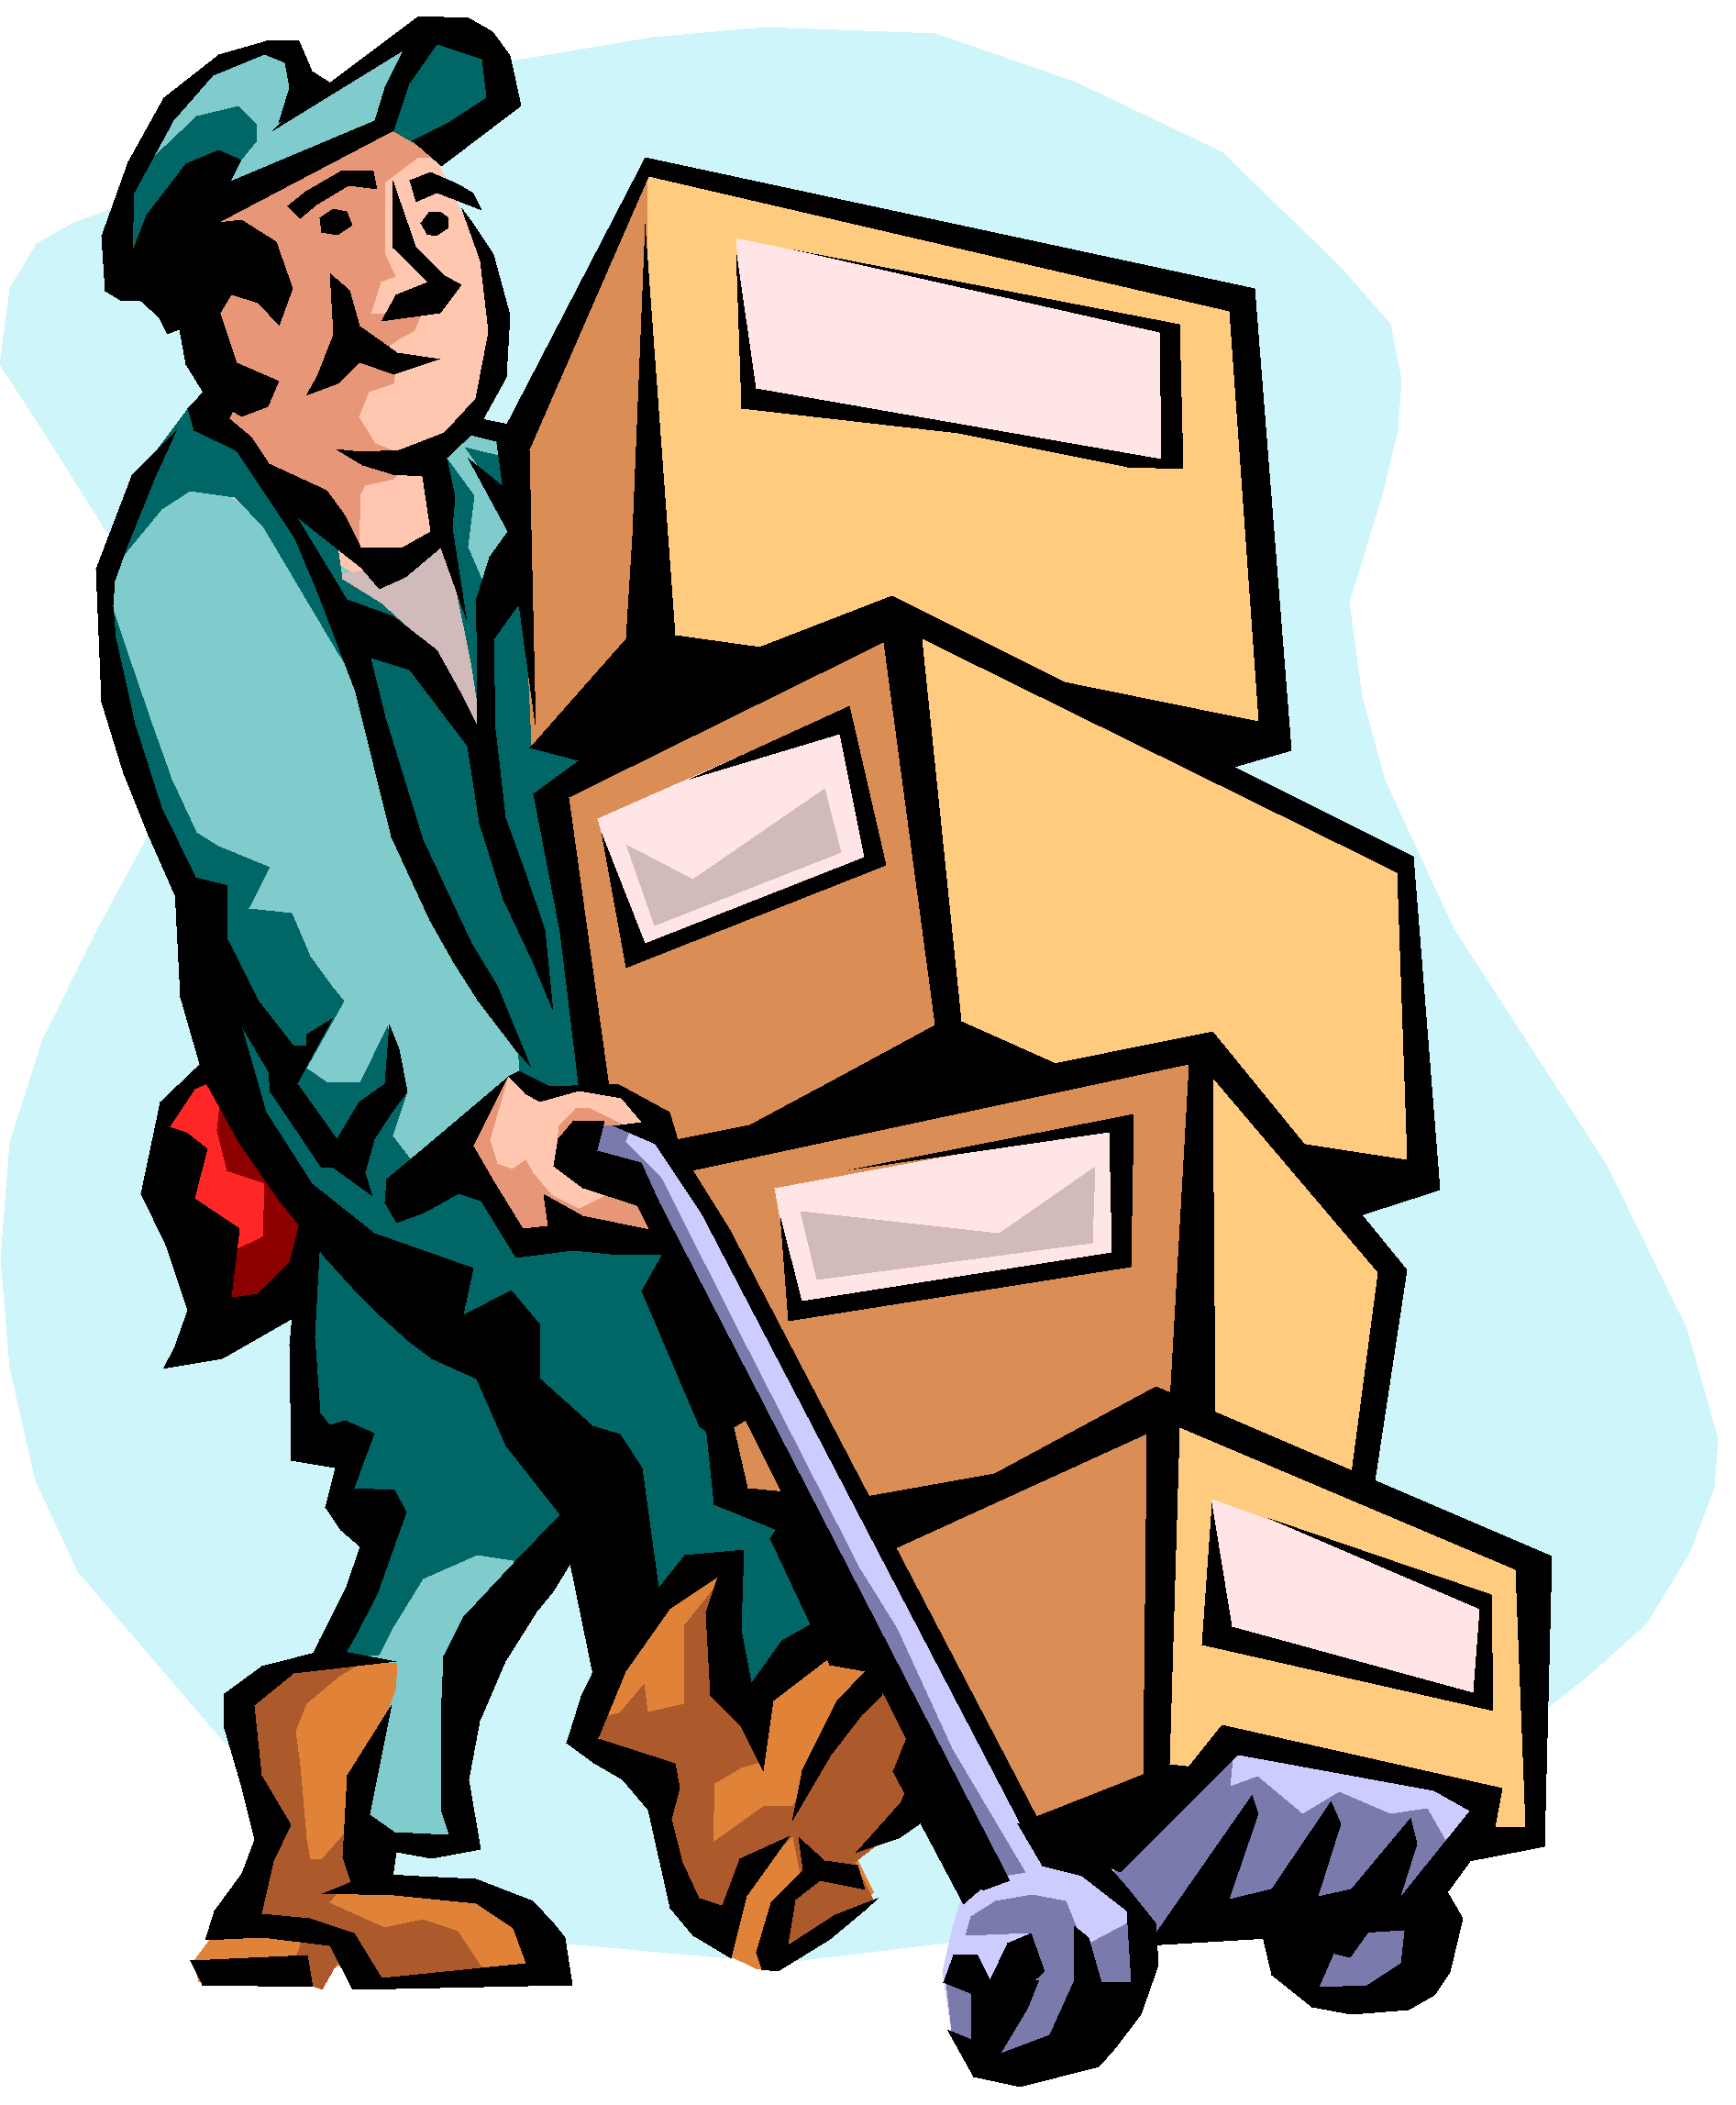 Moving Truck Clipart